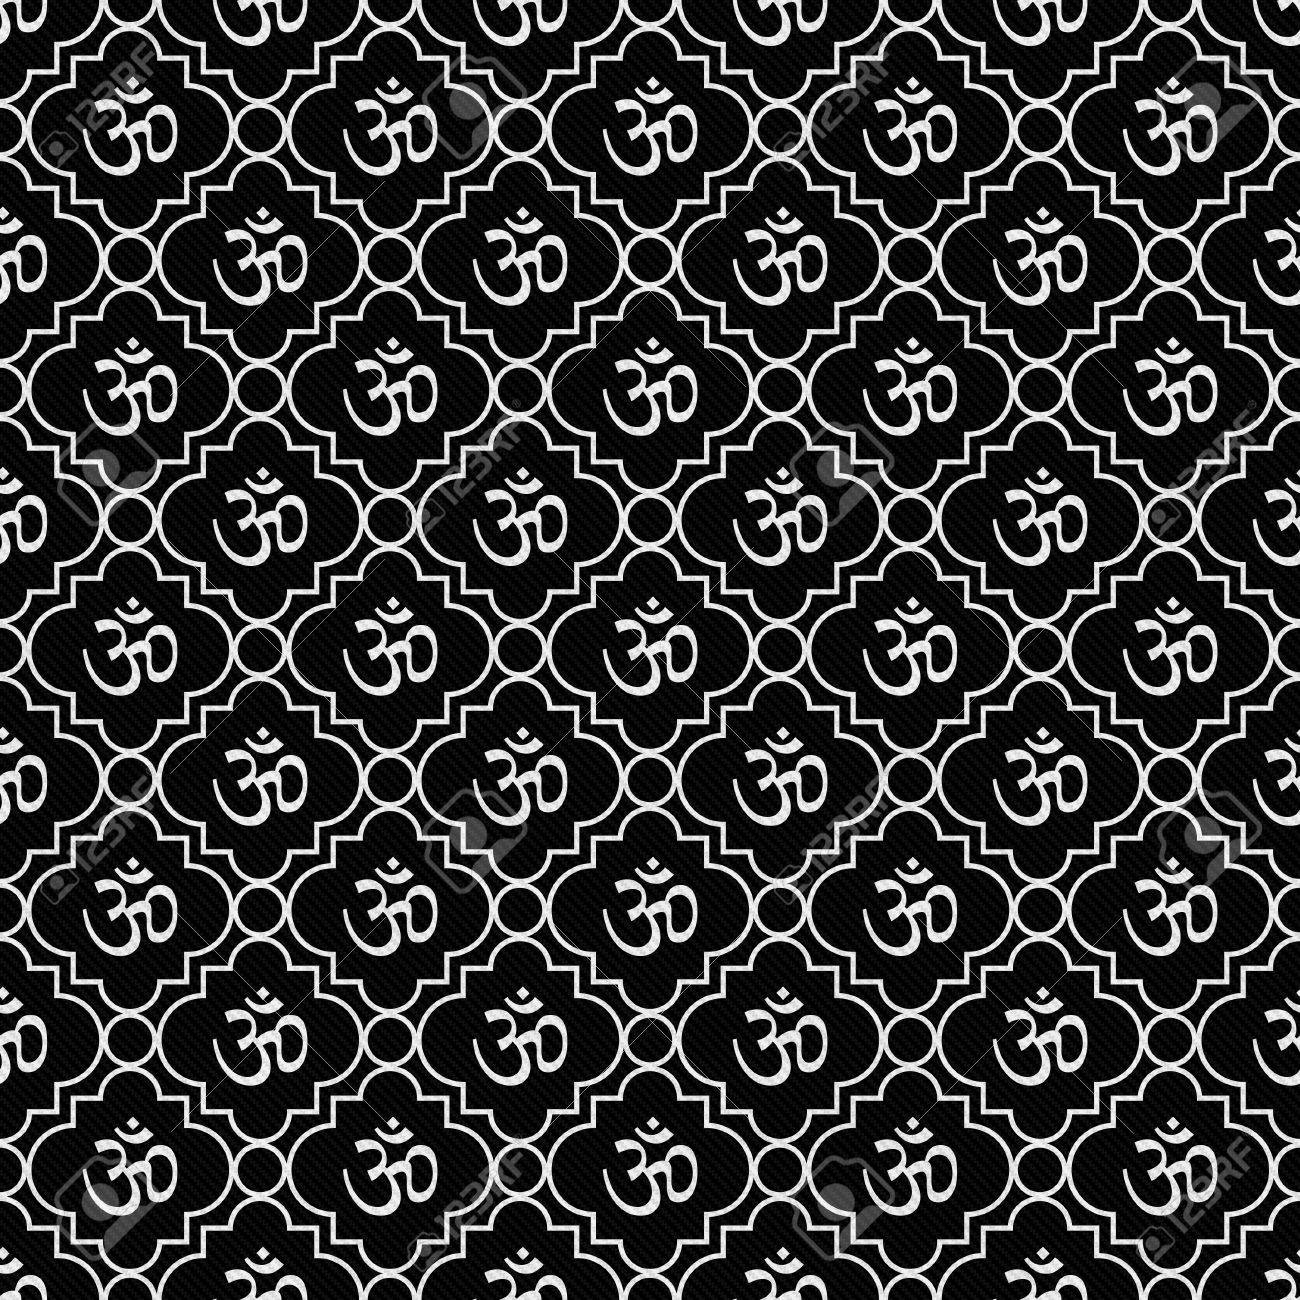 Black And White Aum Hindu Symbol Tile Pattern Repeat Background